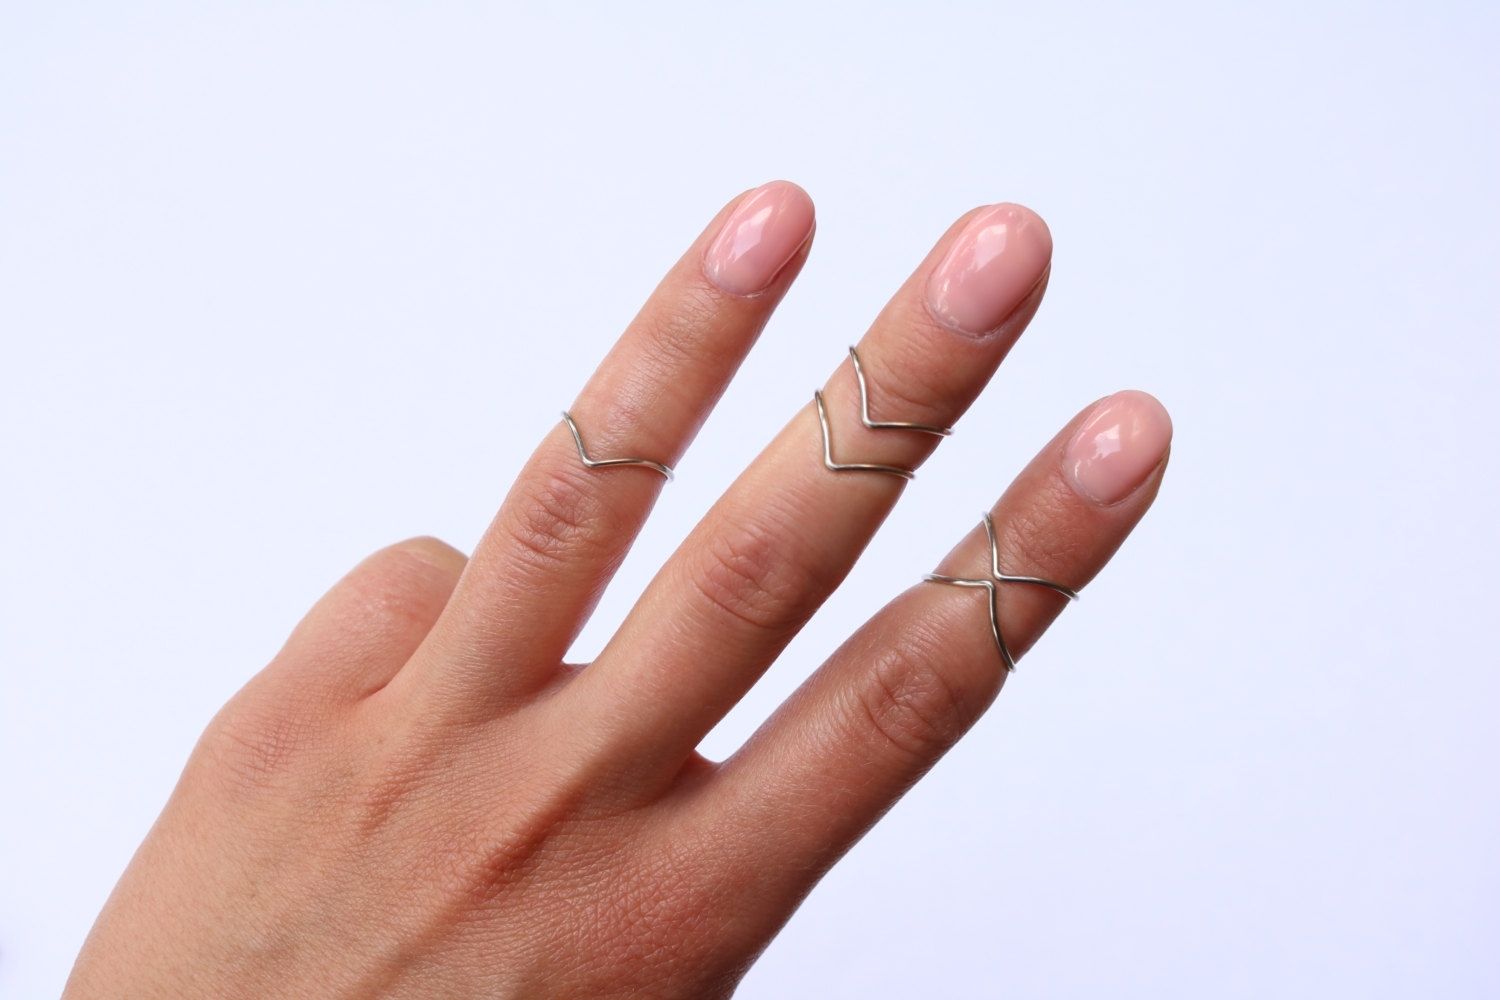 Midi Rings Boho Chic Jewelry Knuckle Ring Set Stacking Within Best And Newest Chevron Knuckle Rings Sets (View 8 of 15)